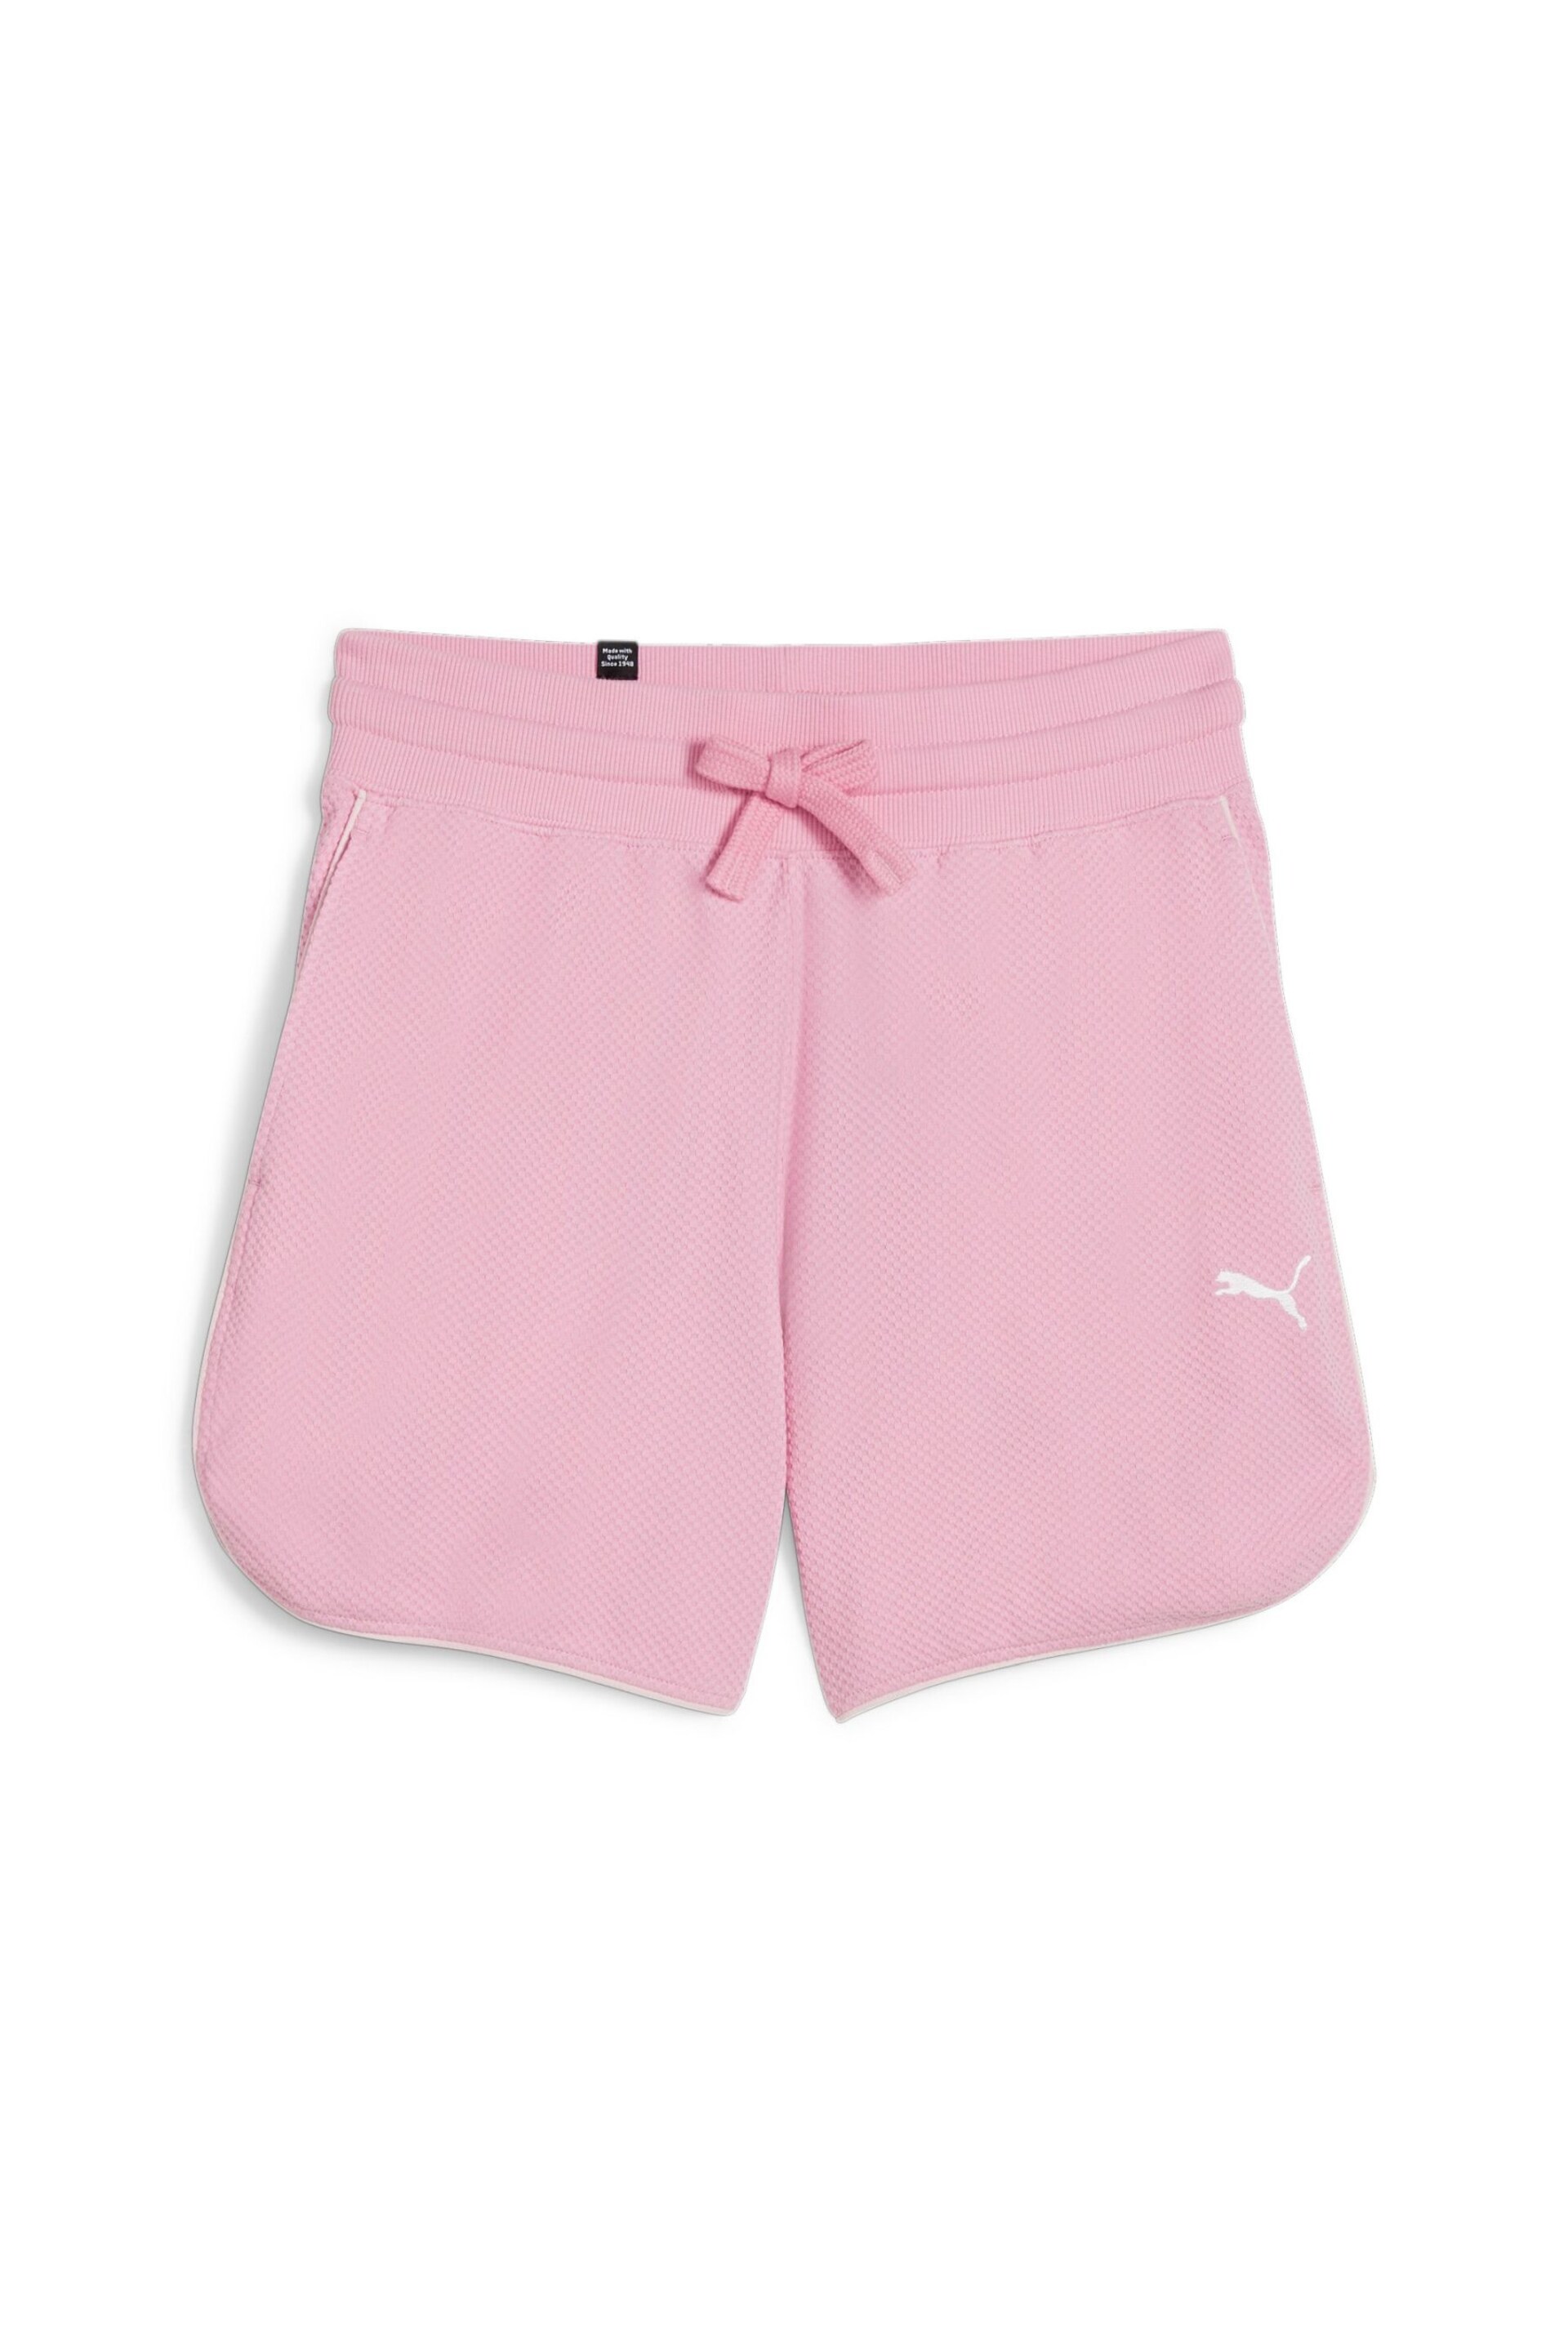 Puma Pink Her Womens Shorts - Image 6 of 7